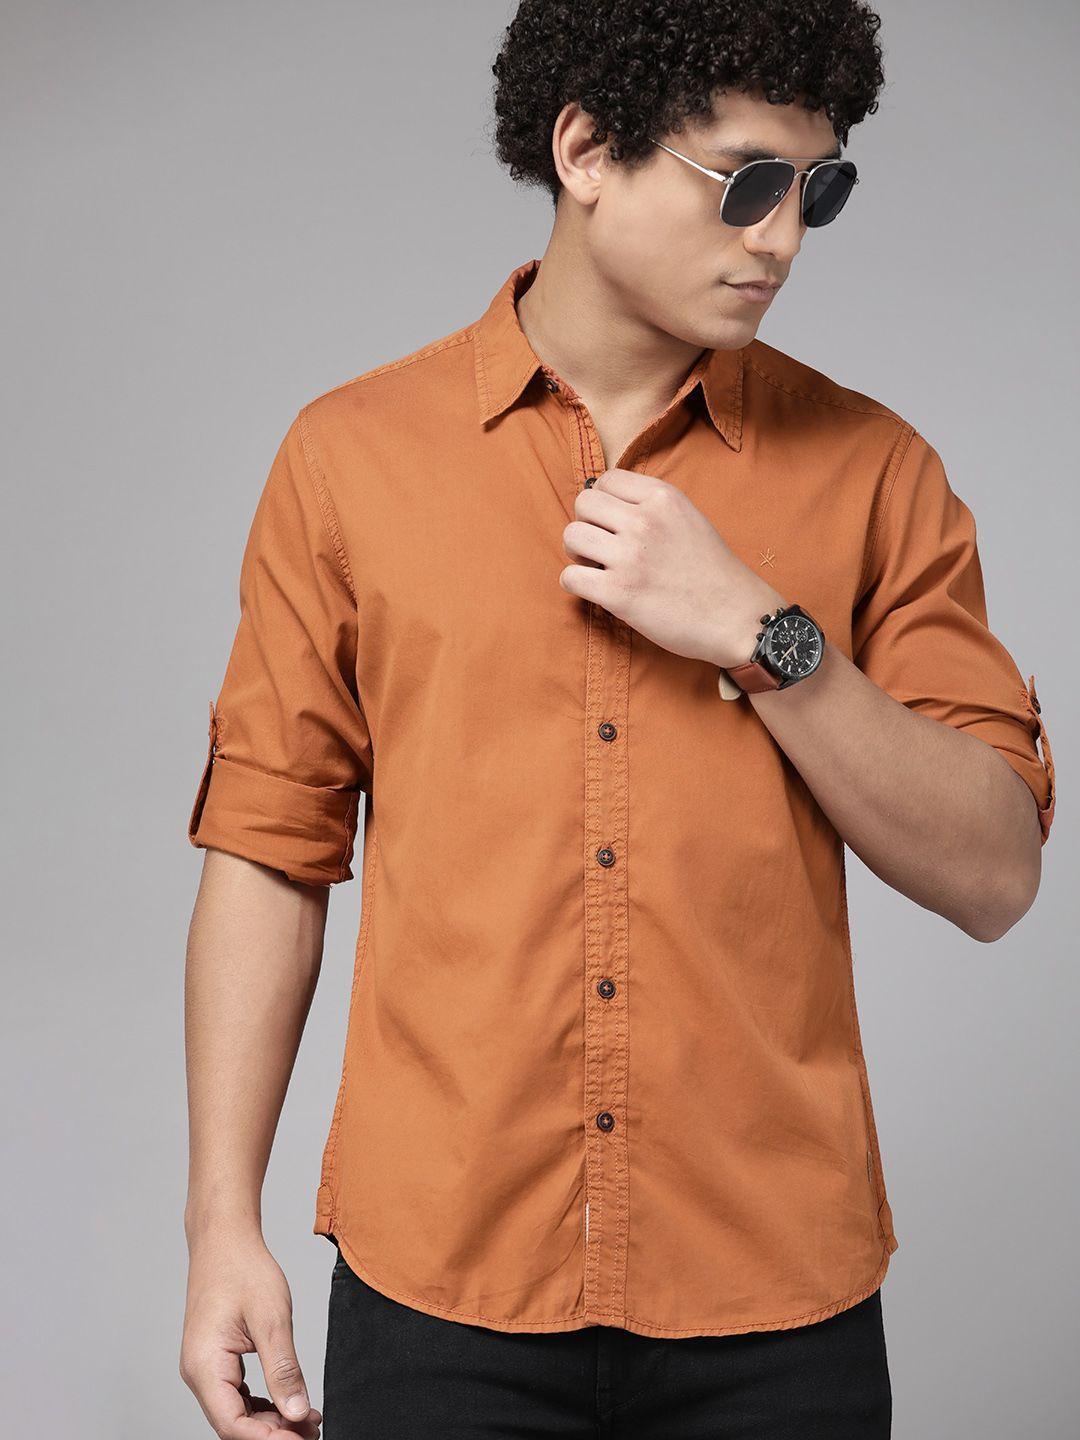 the roadster lifestyle co. men pure cotton casual shirt